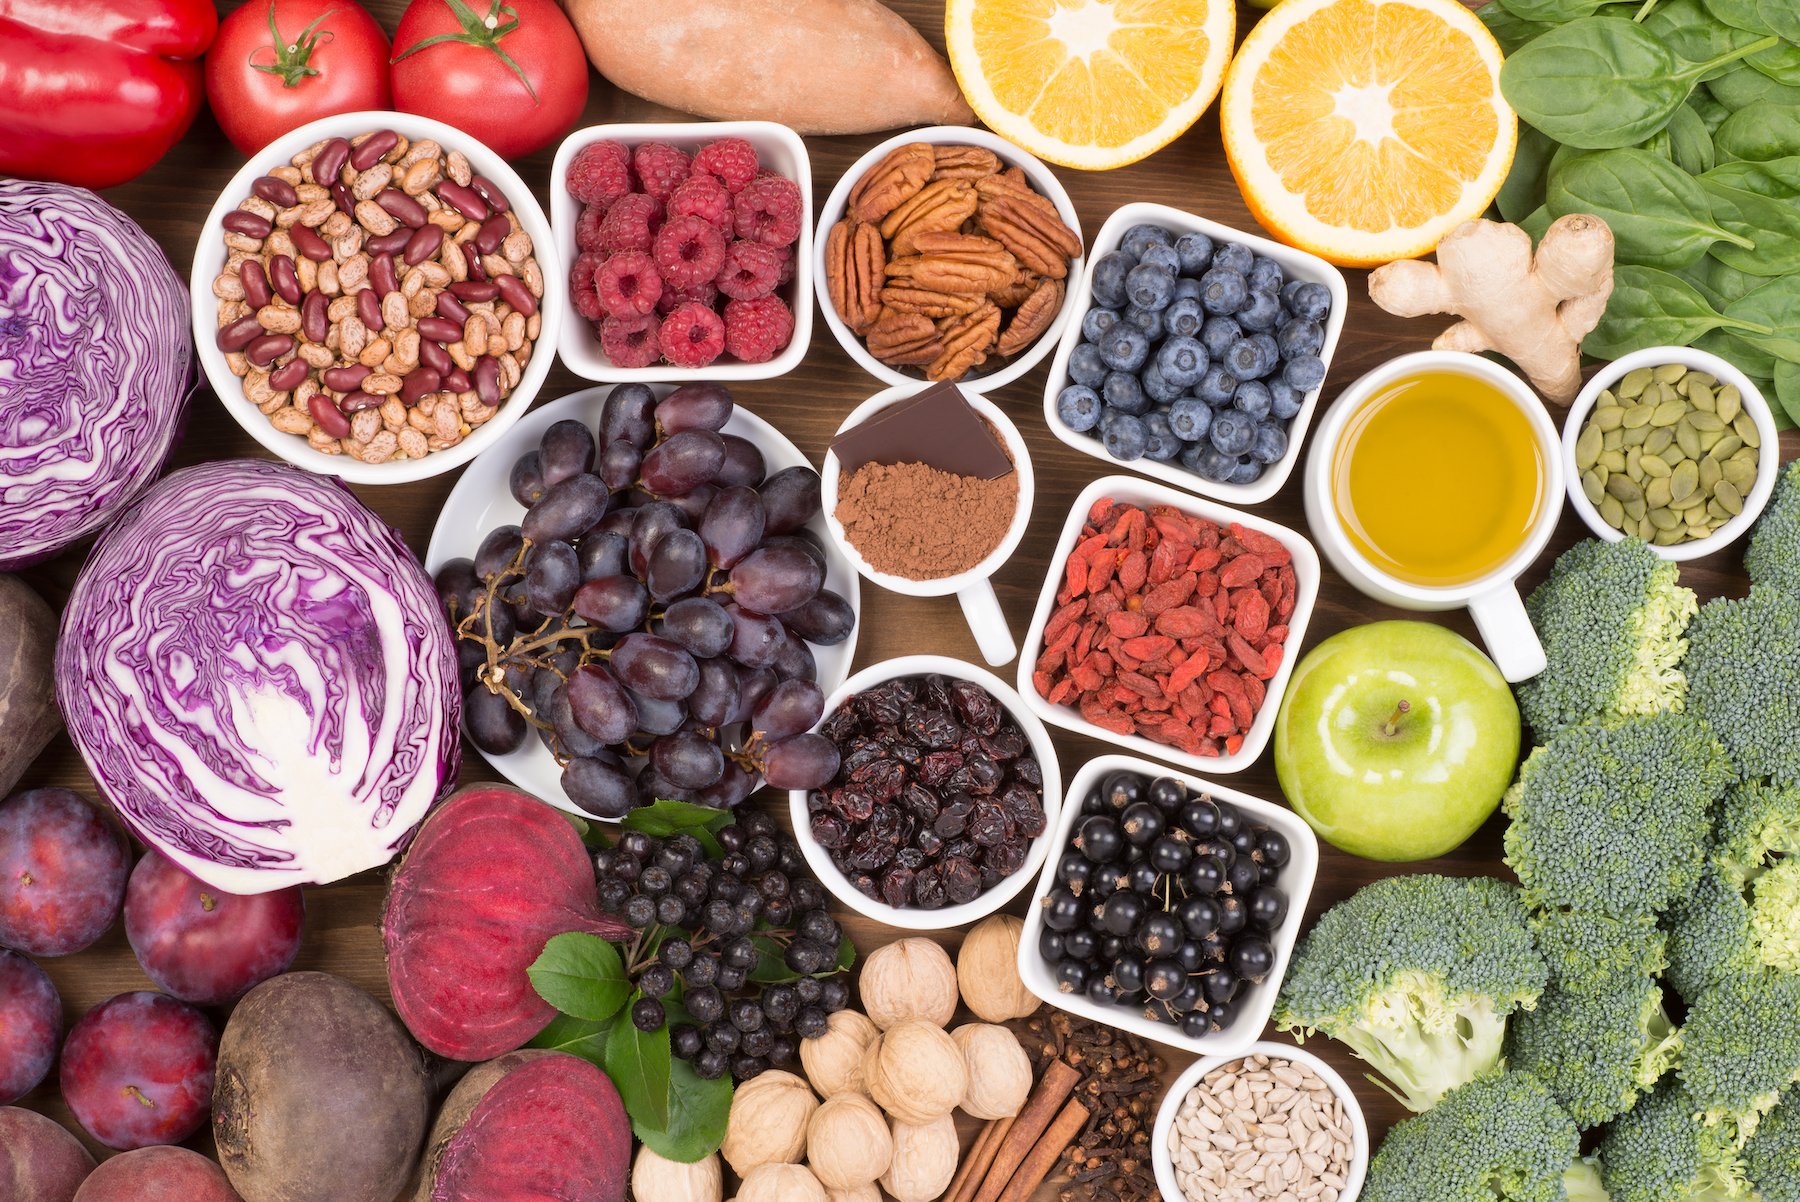 8 Micronutrients essential for metabolic health